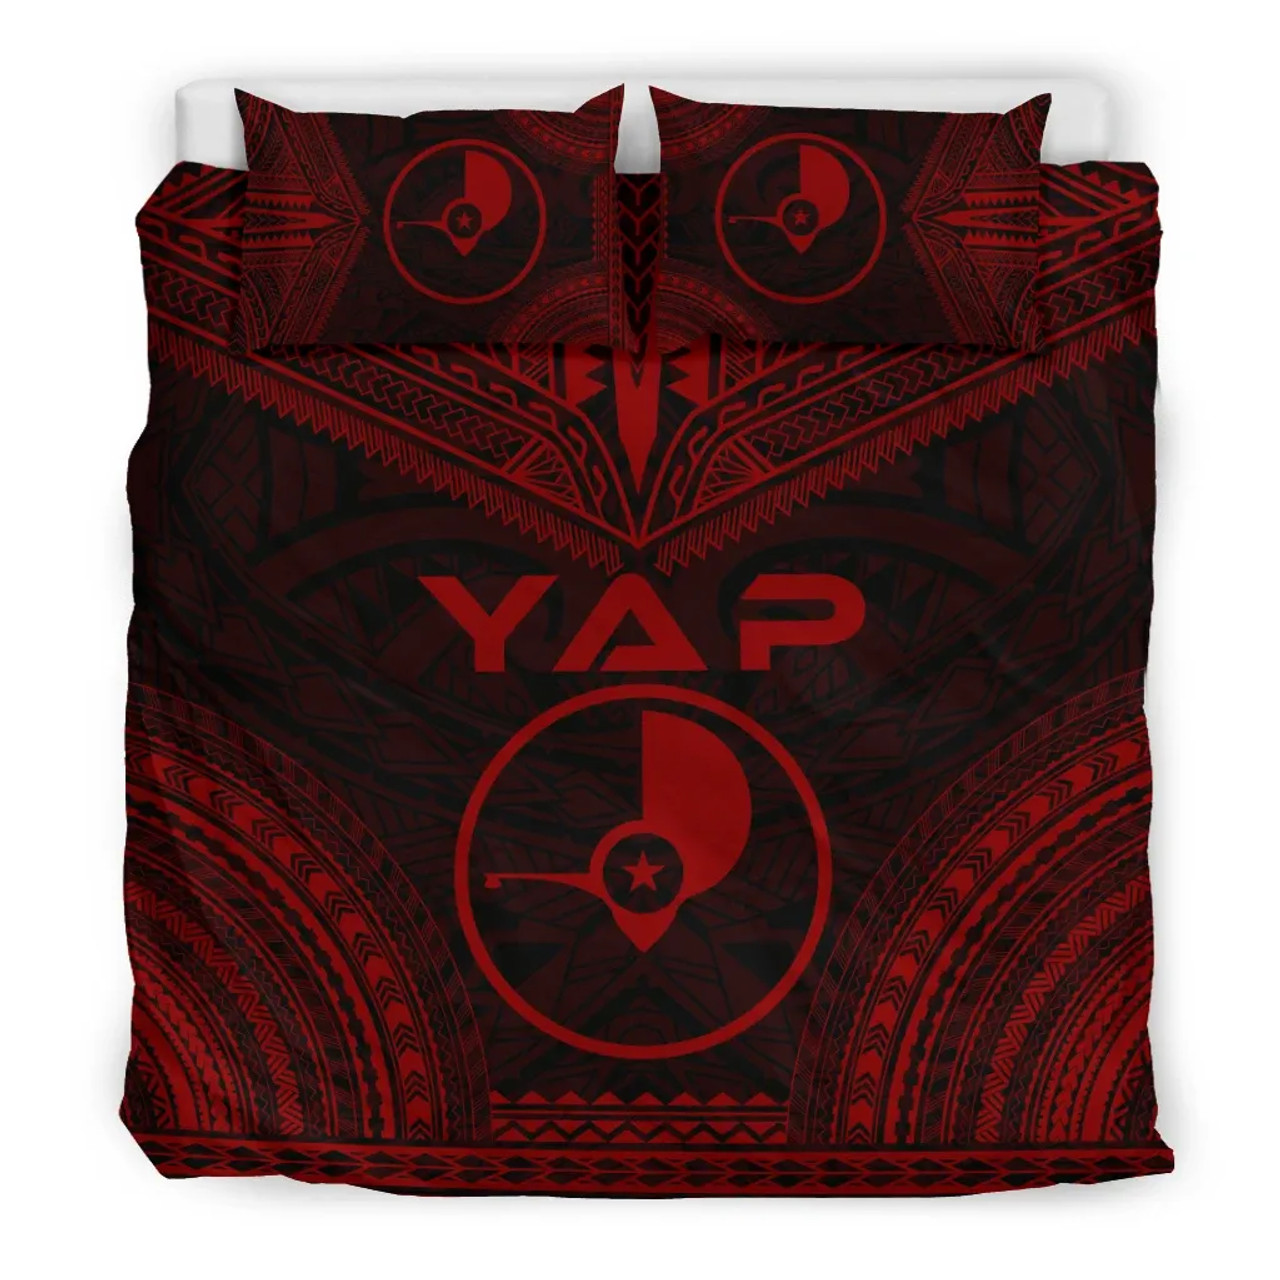 Yap Polynesian Chief Duvet Cover Set - Red Version 3